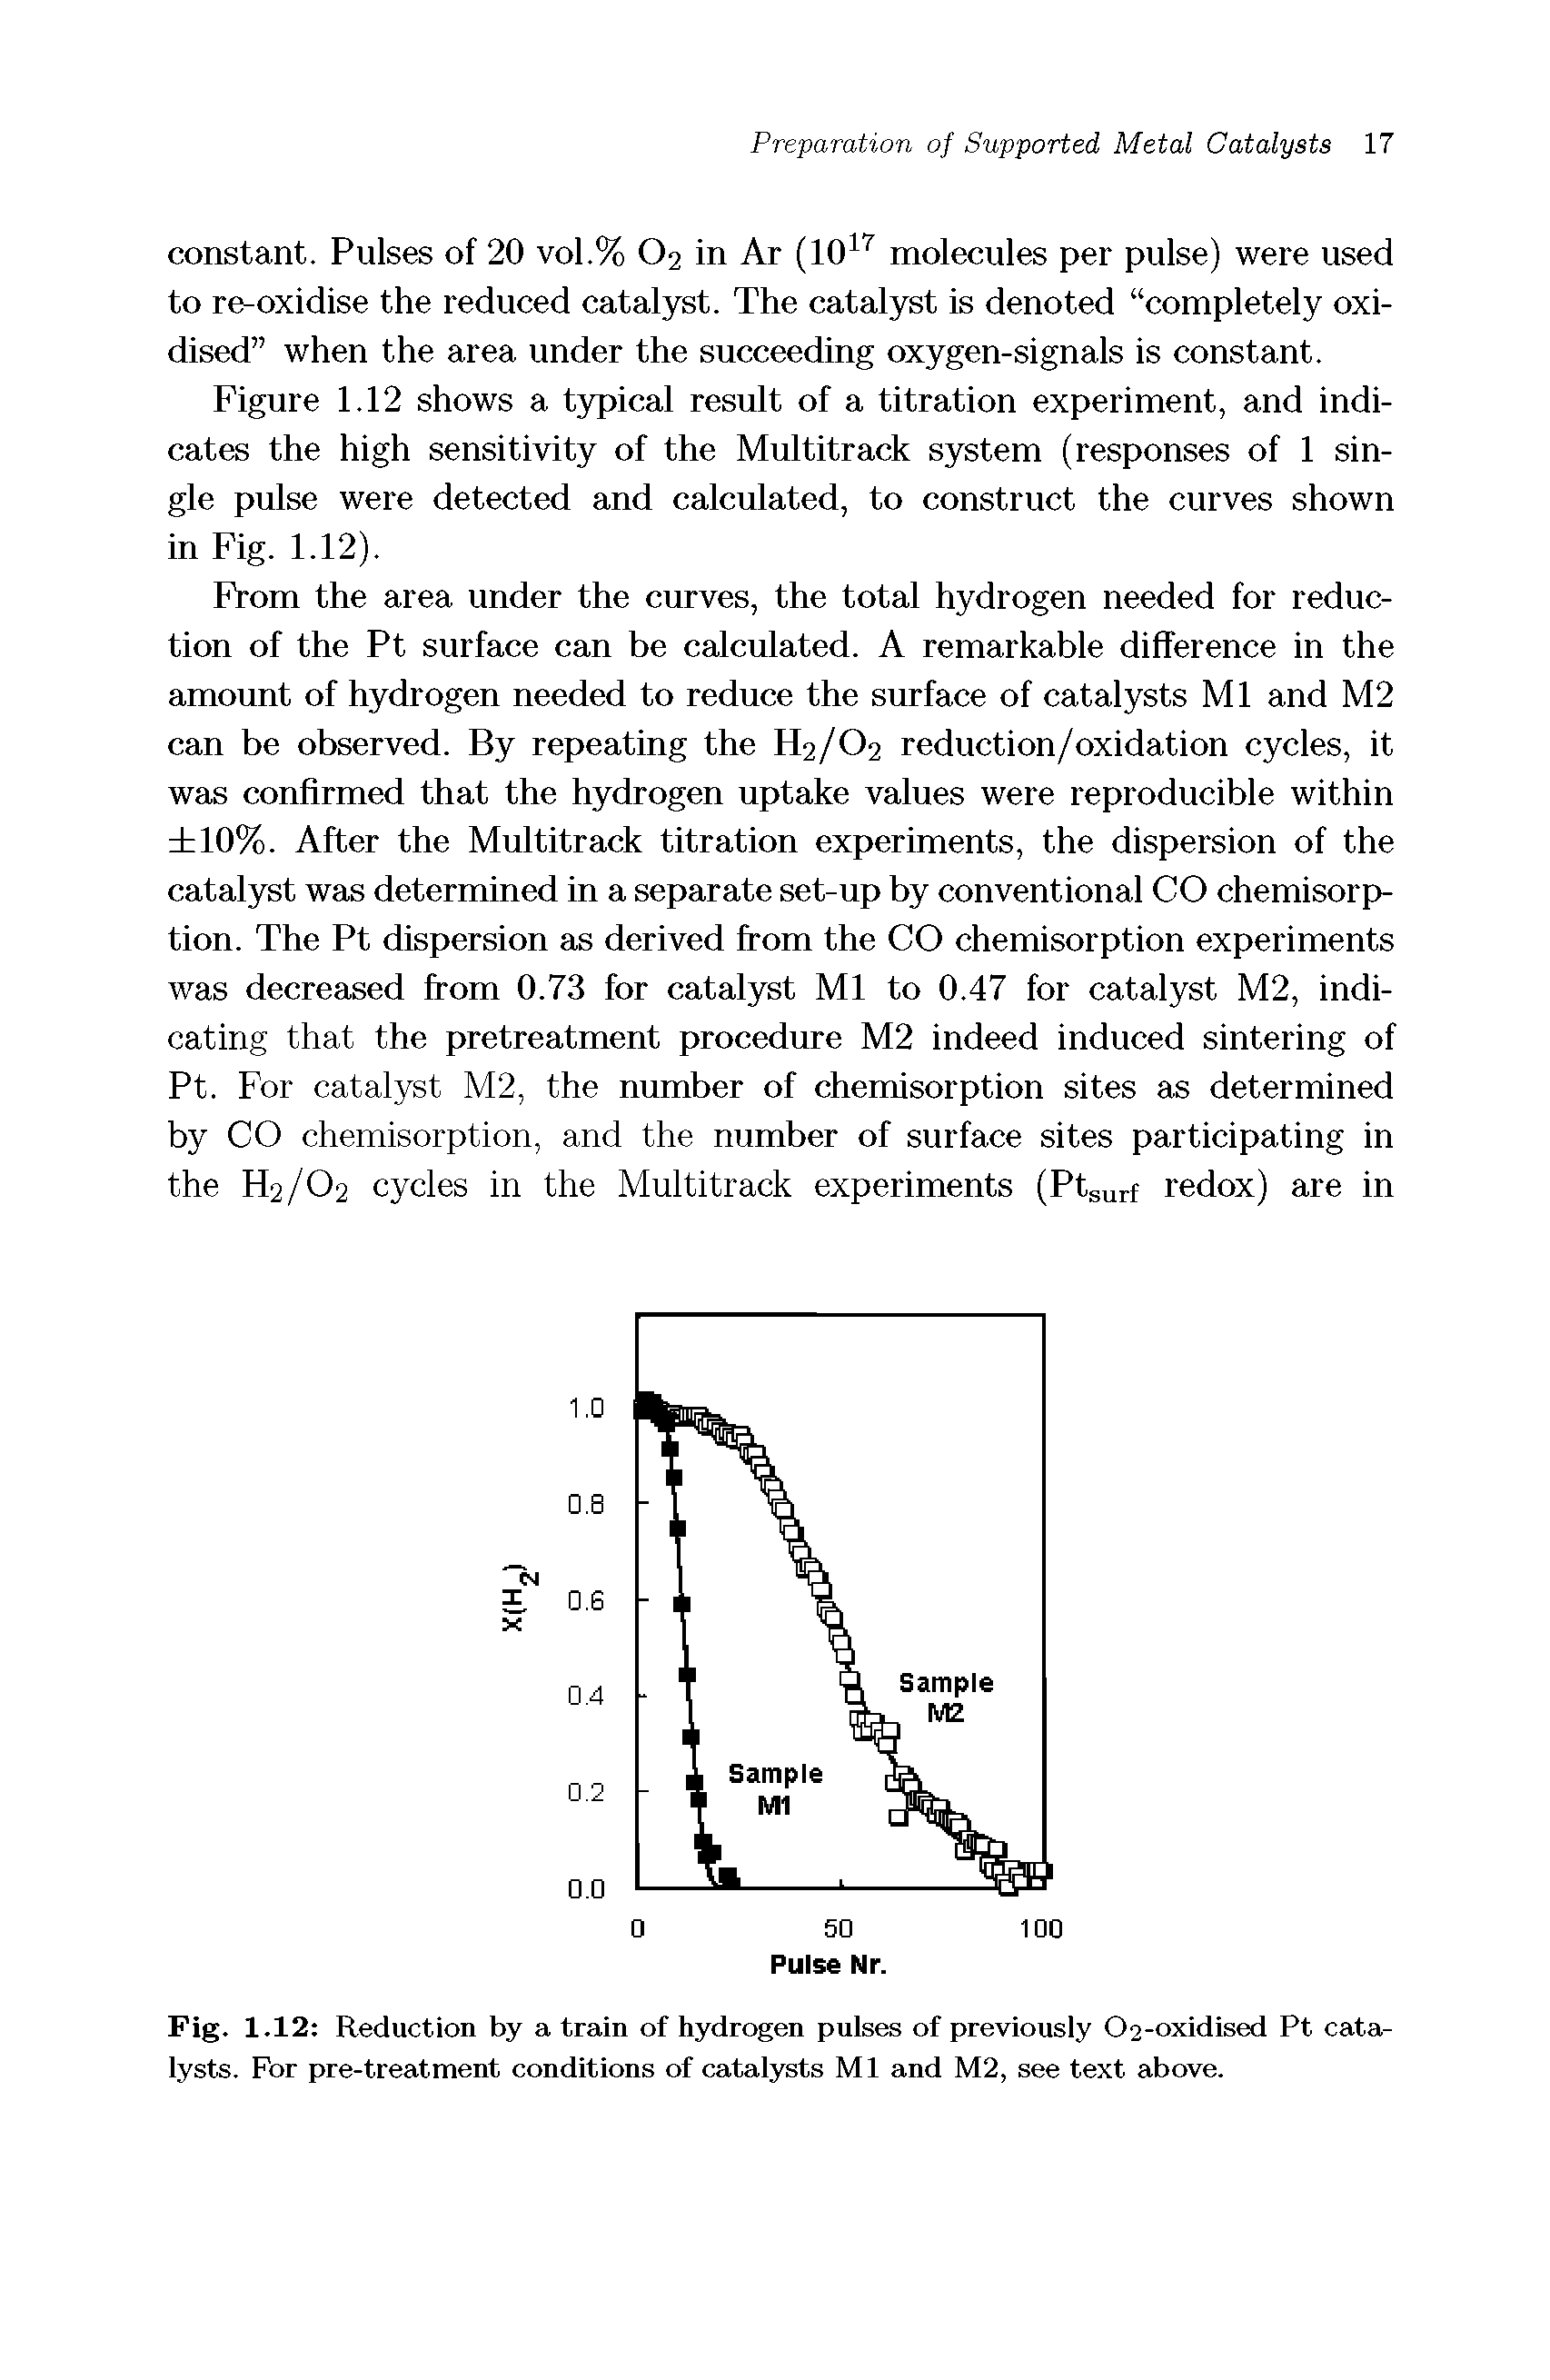 Fig. 1.12 Reduction by a train of hydrogen pulses of previously C>2-oxidised Pt catalysts. For pre-treatment conditions of catalysts Ml and M2, see text above.